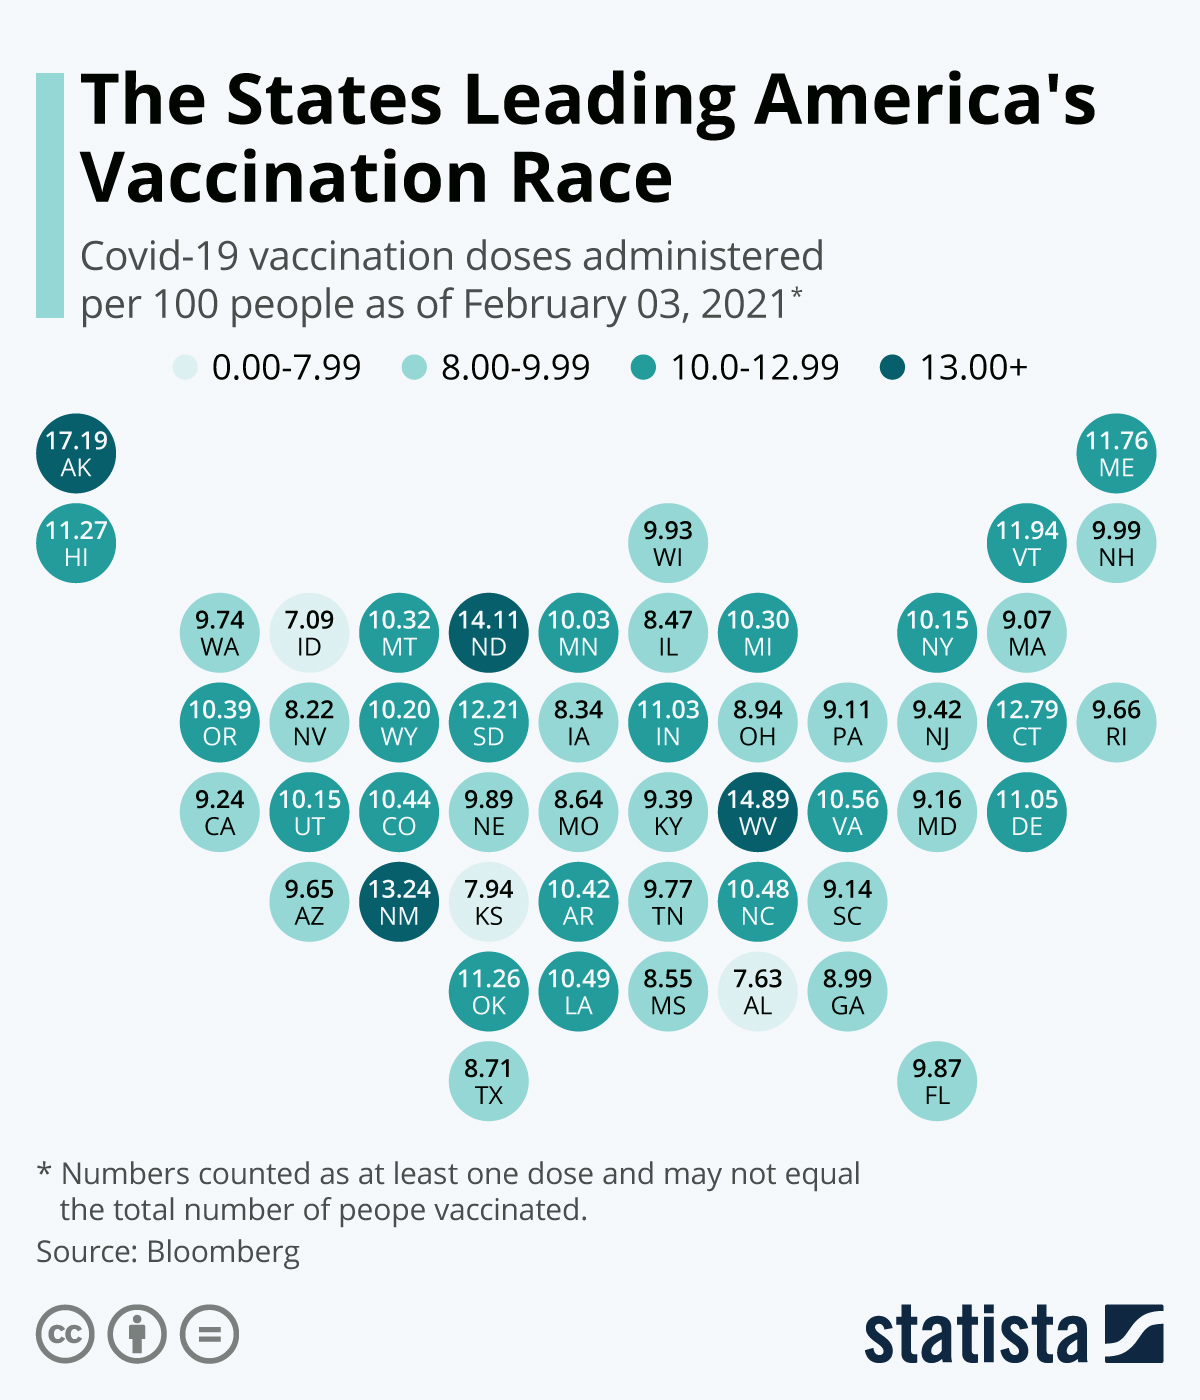 The States Leading Americas Vaccination Race